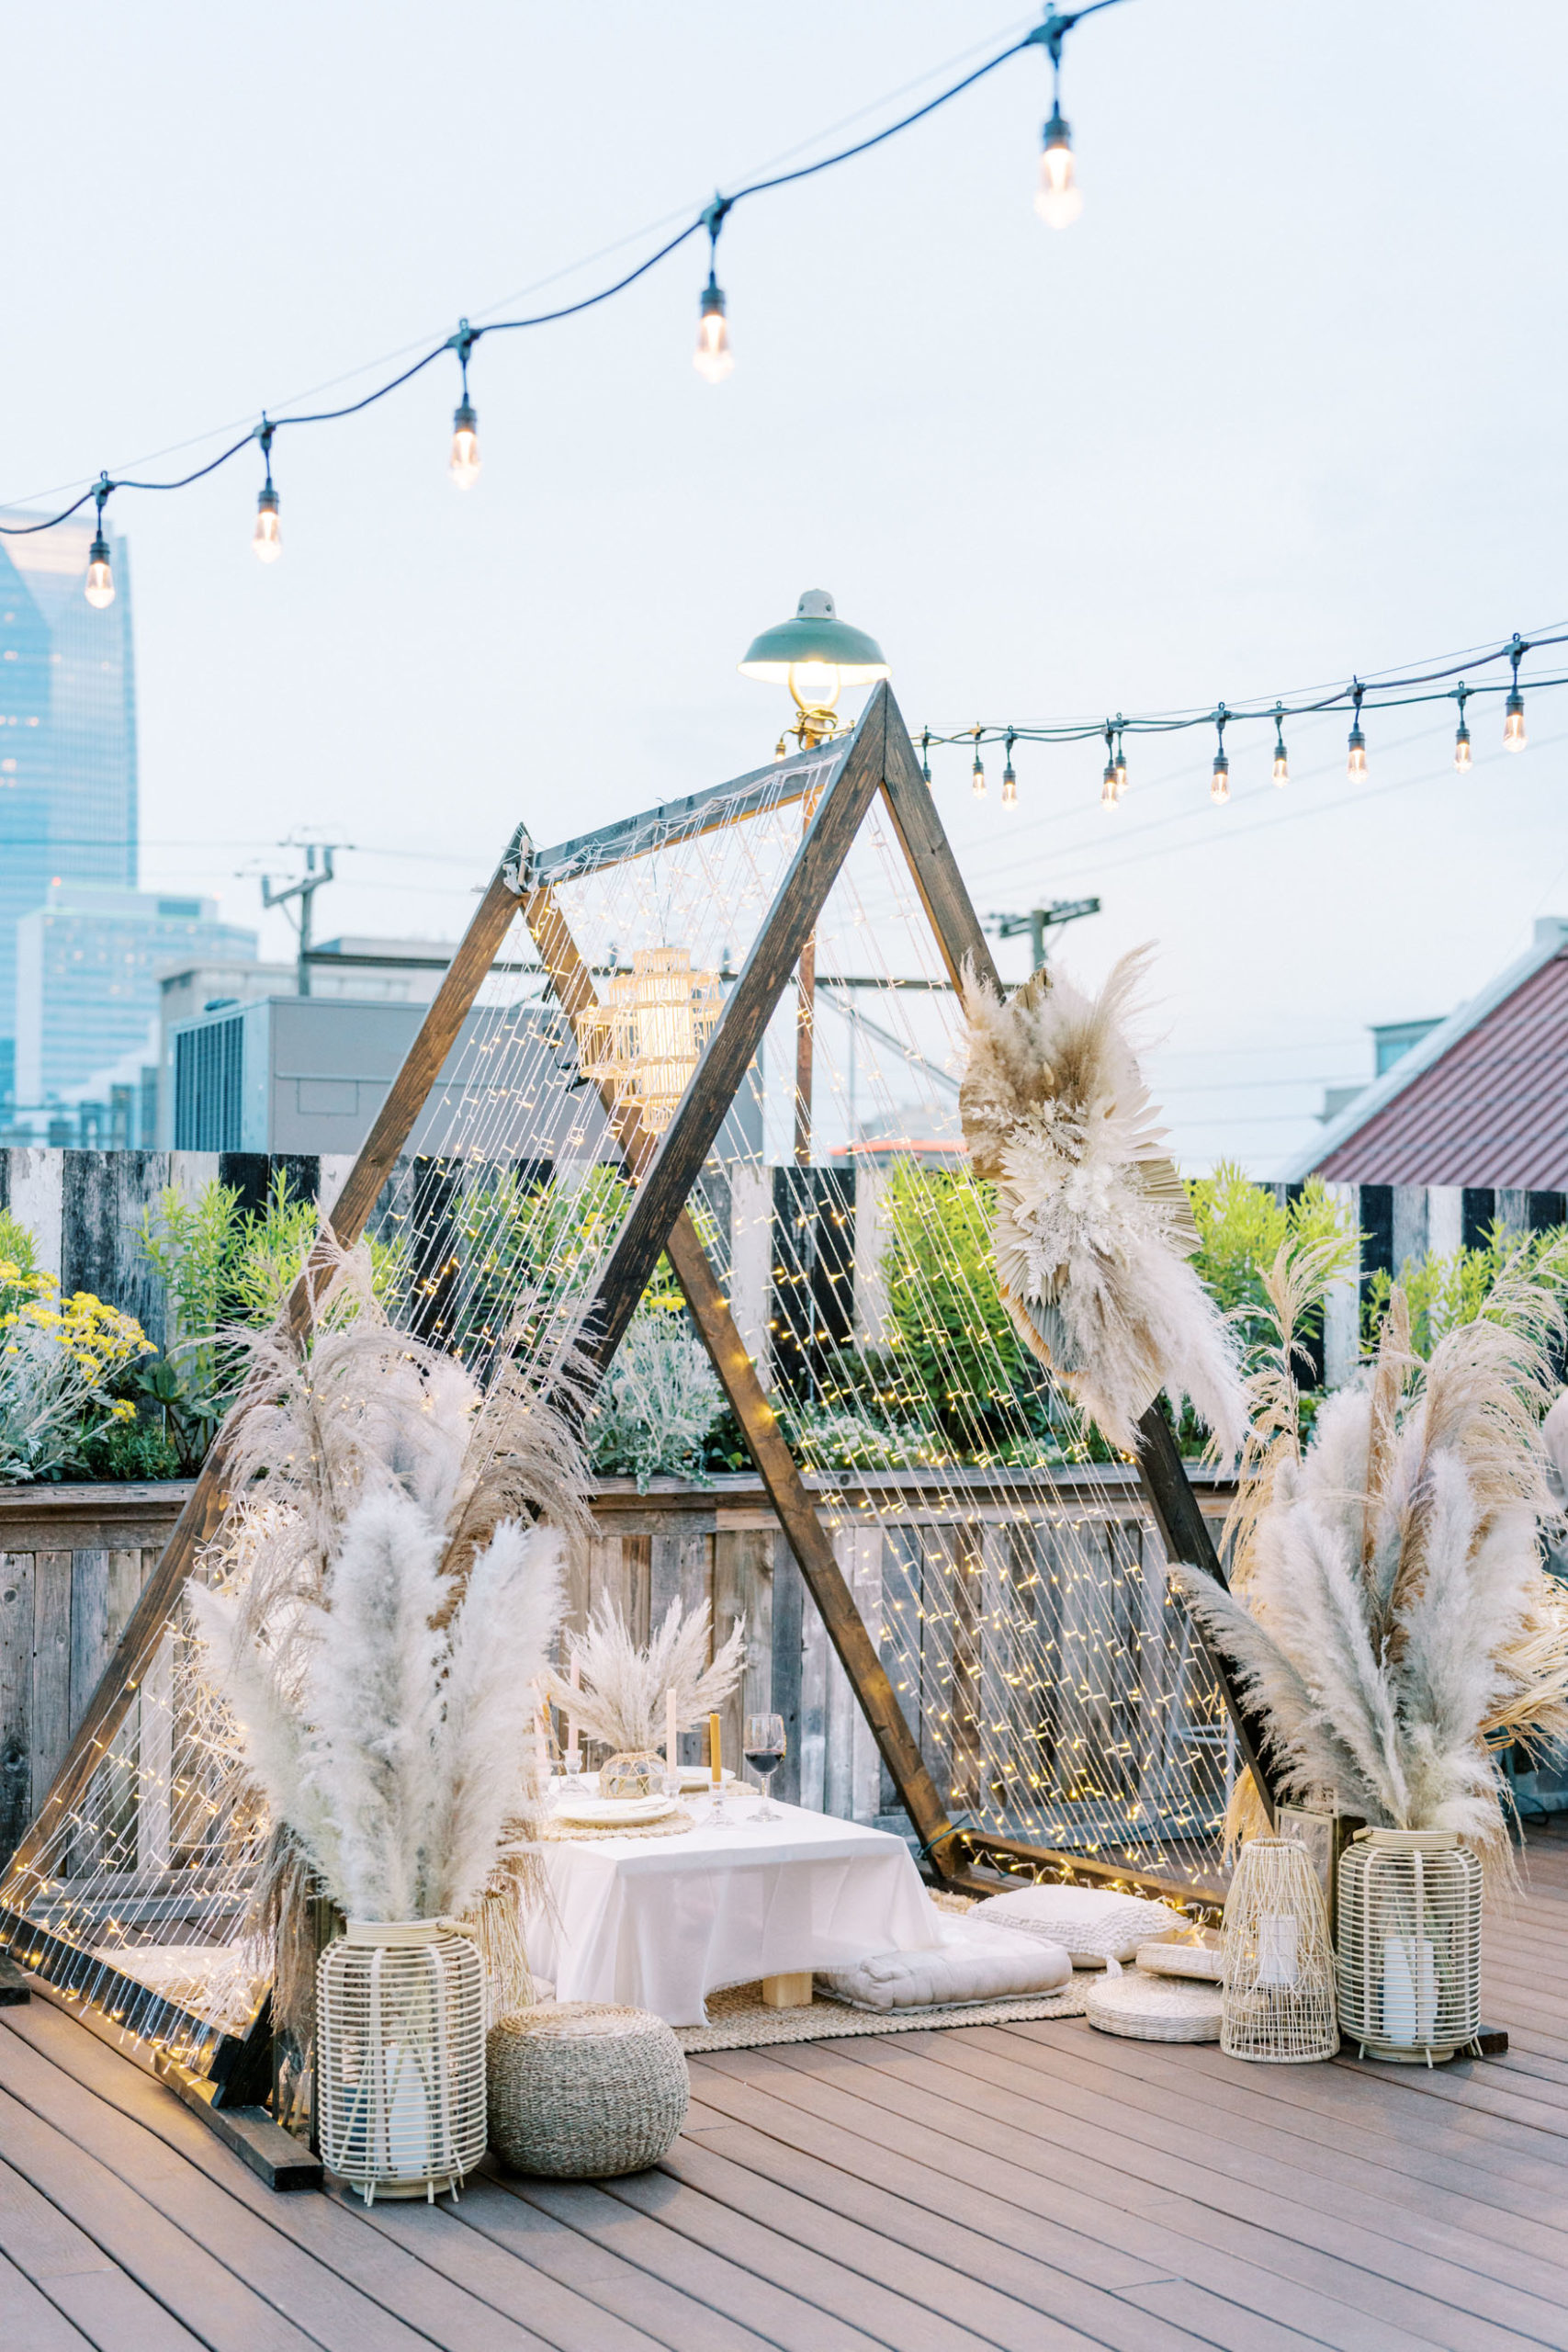 rooftop engagement at Plenty Mercantile in OKC